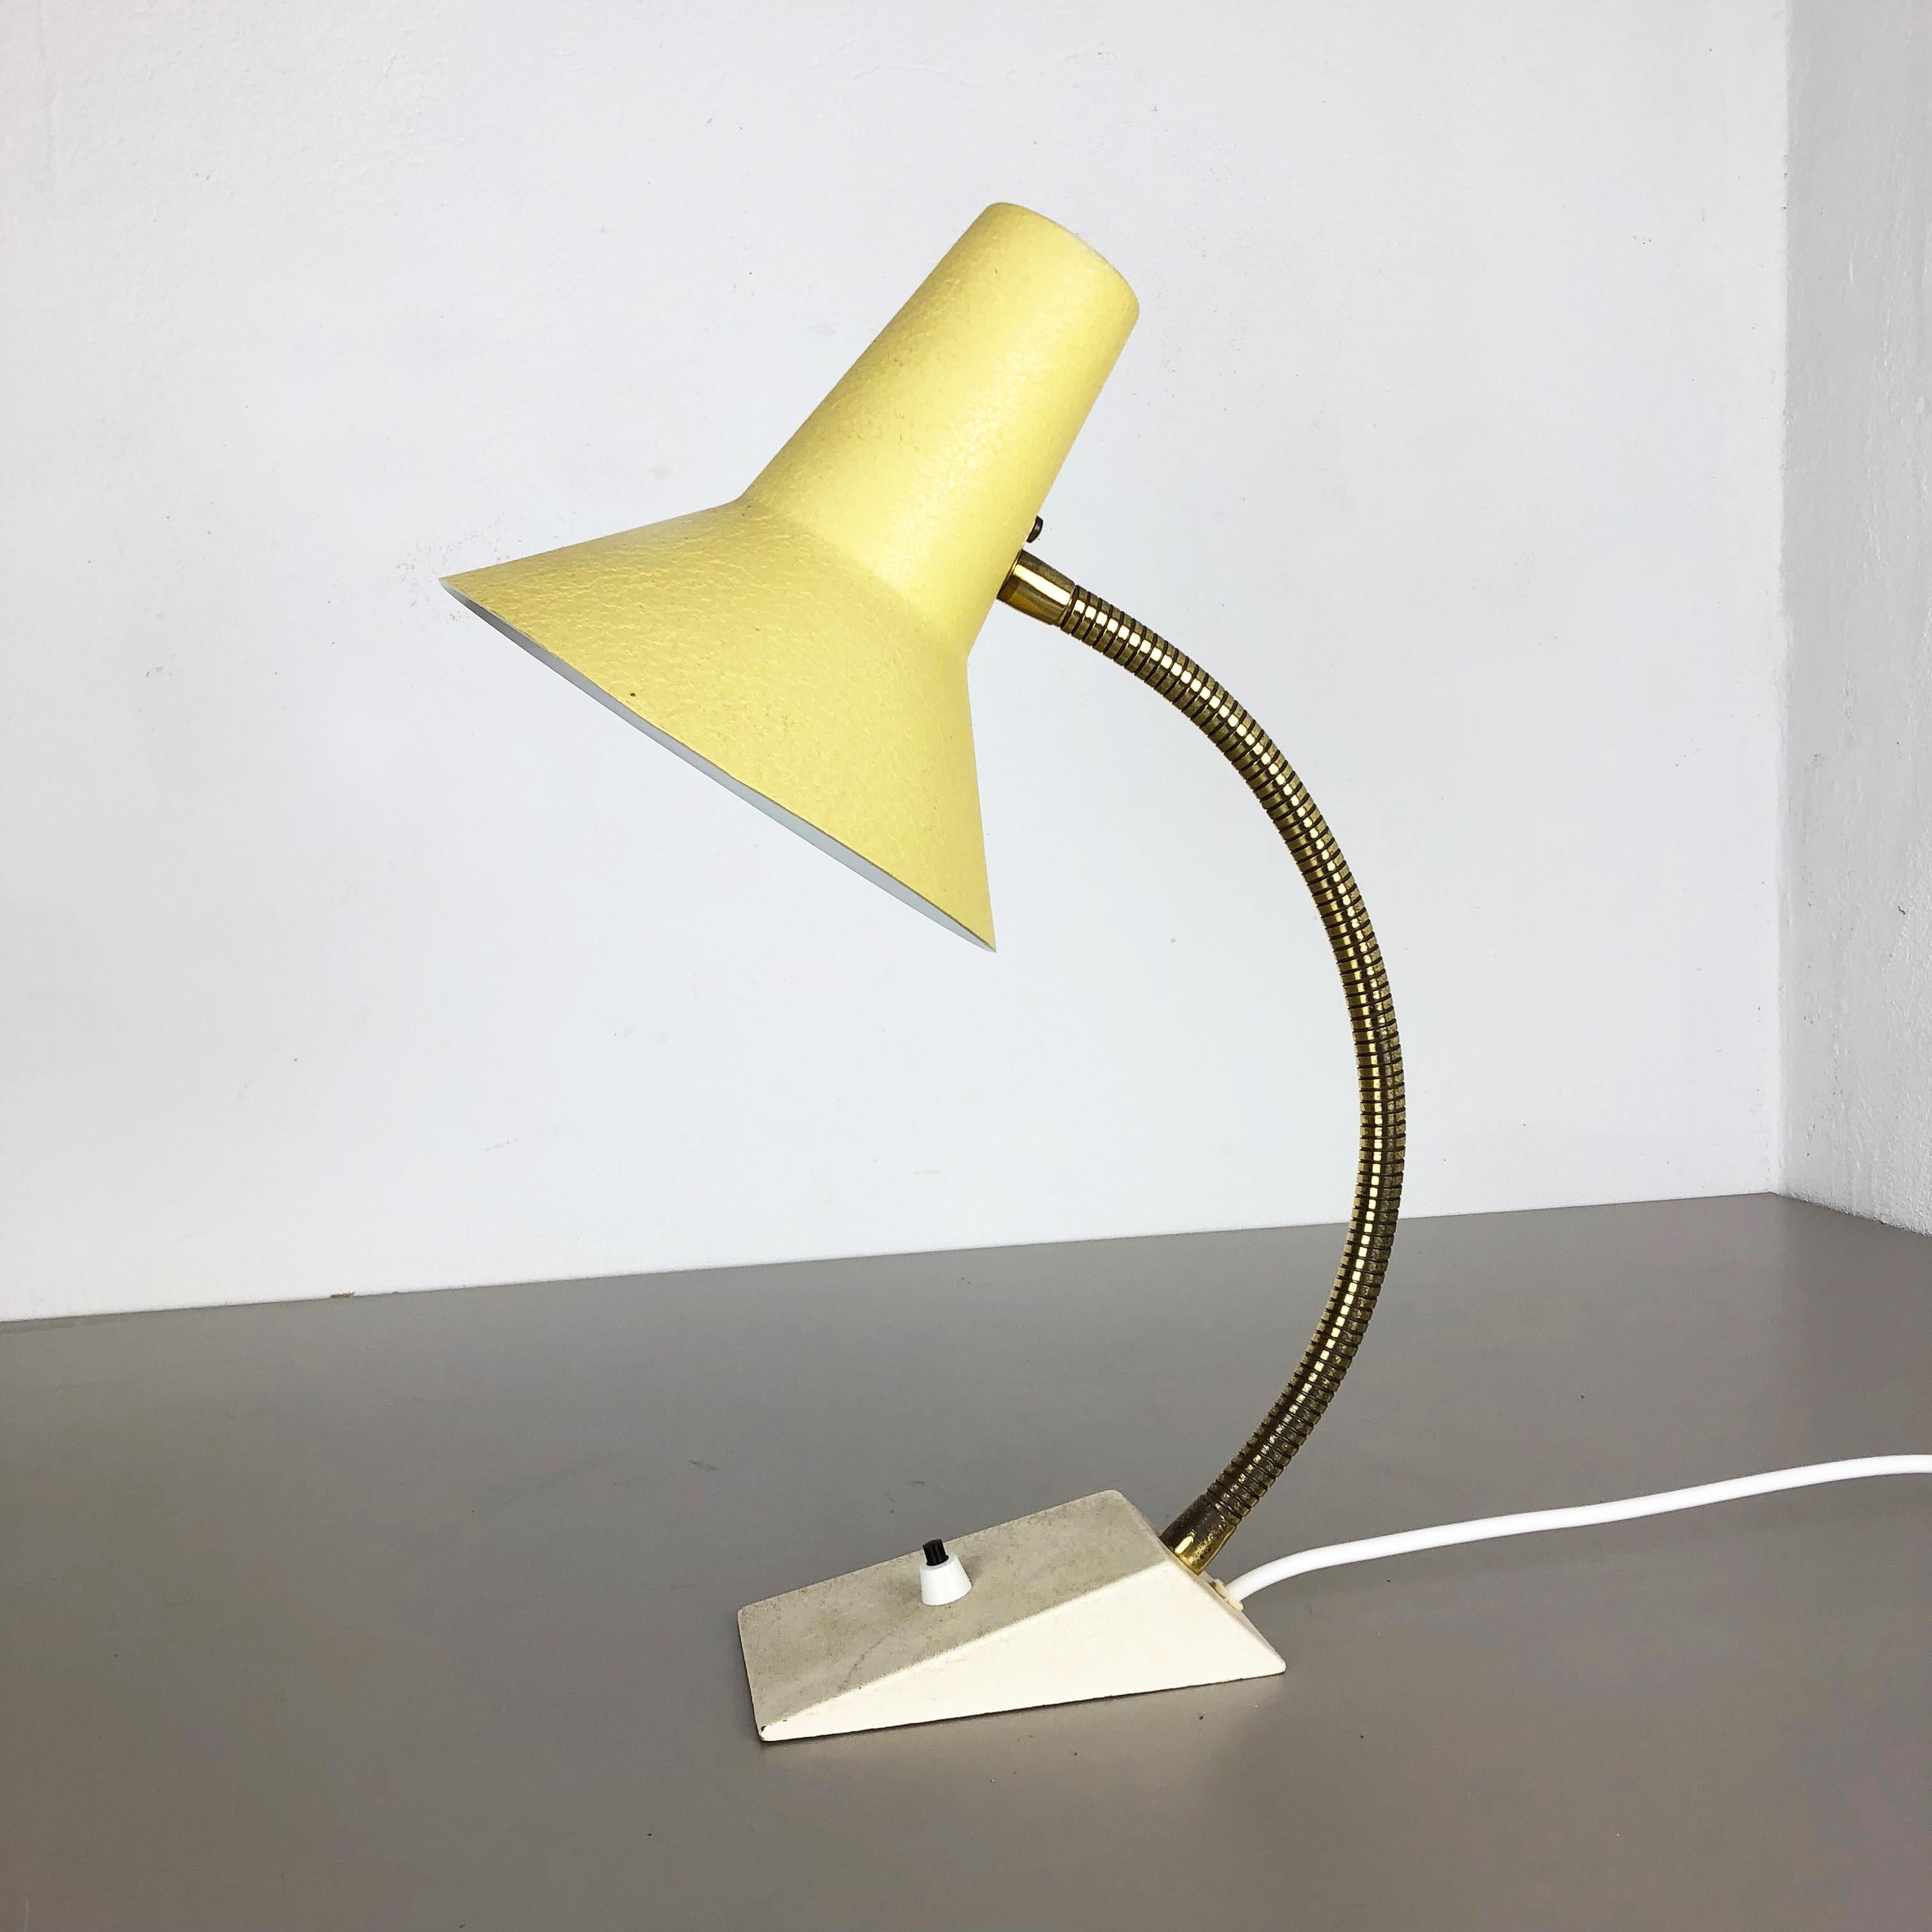 Article:

Table light


Origin:

Germany


Producer:

SIS lights, Germany


Material:

Metal


Age:

1960s



Description:

This original 1960s table light was designed and produced by SIS Lights in Germany. This